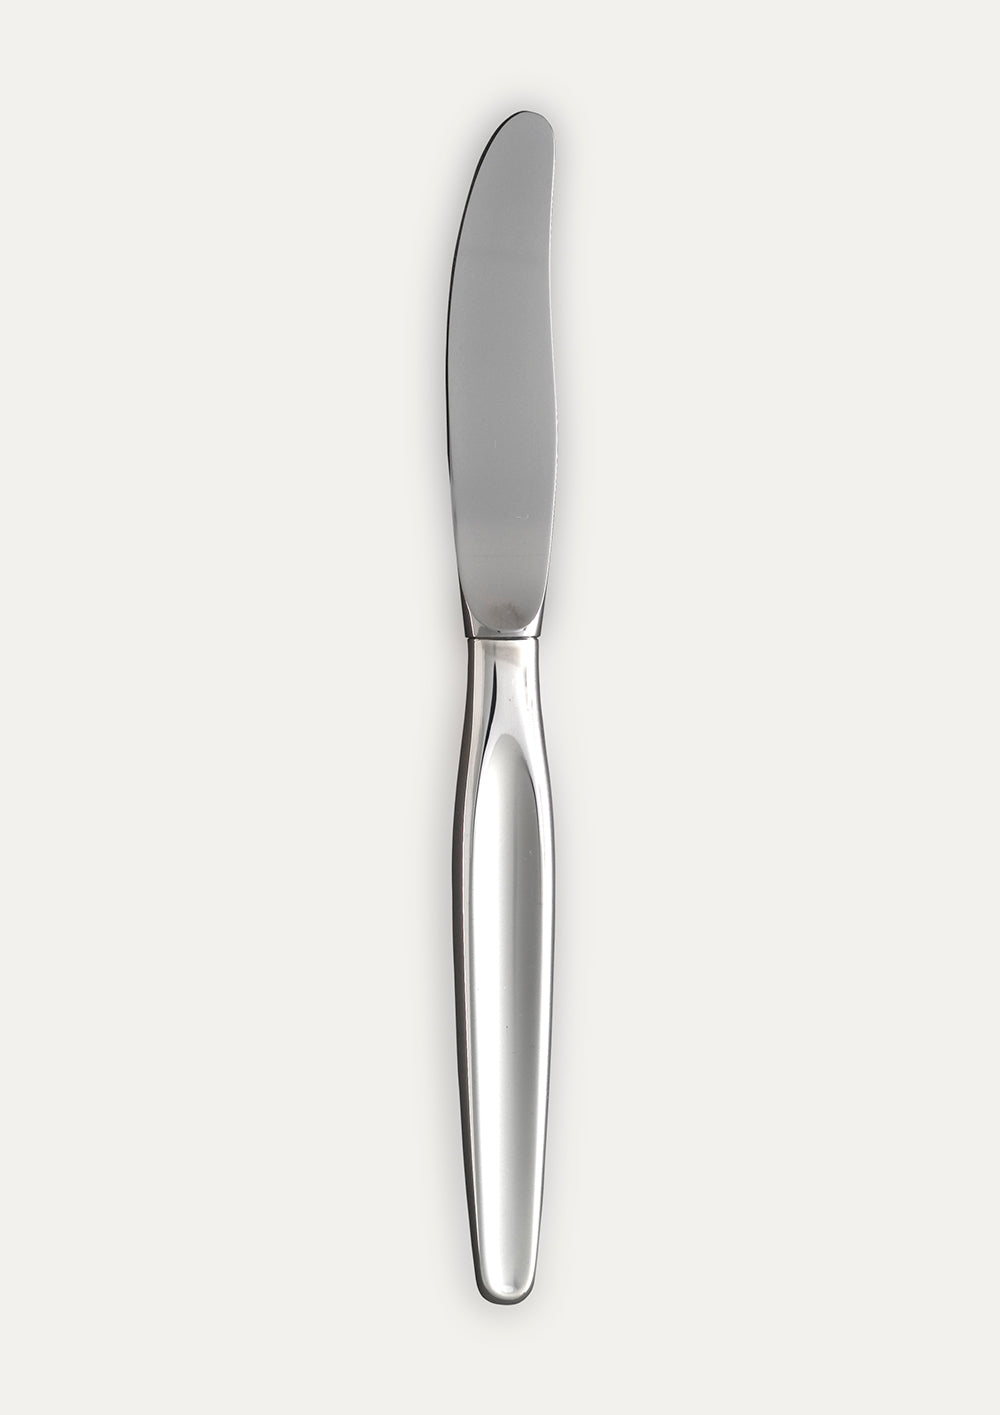 Aase small dining knife with a long handle